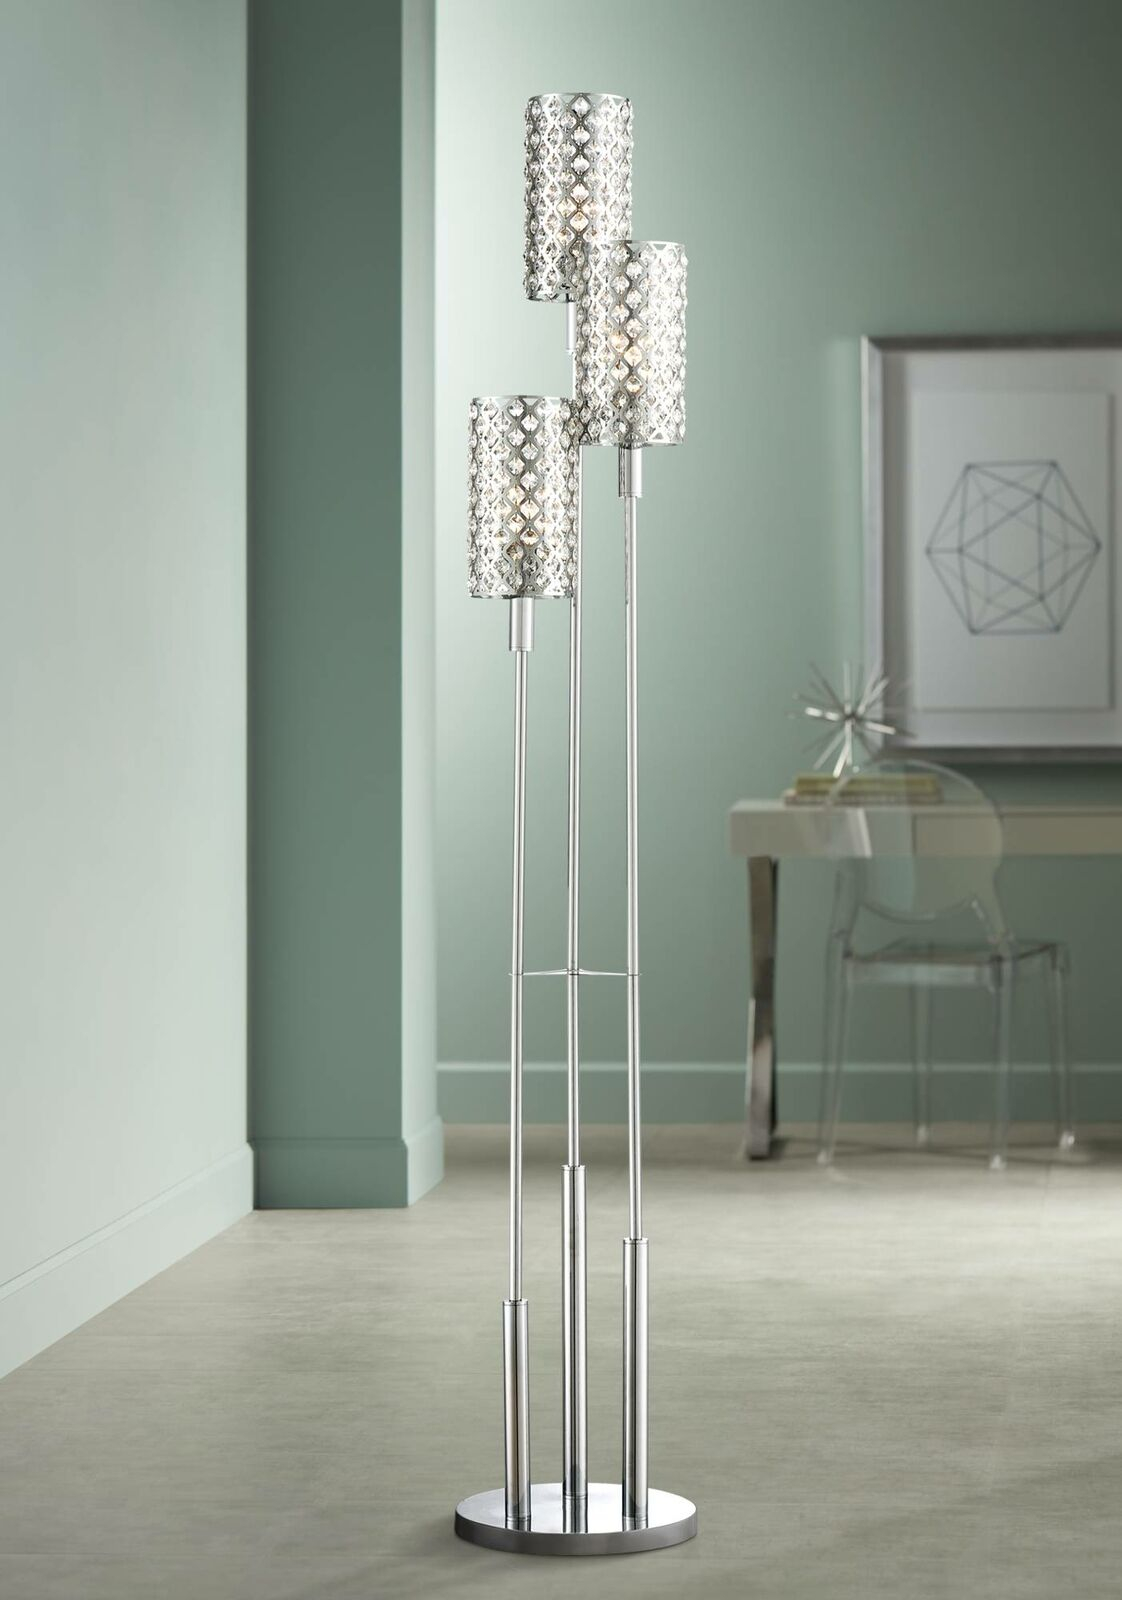 Modern Floor Lamp 3 Light Chrome Glitz Crystal For Living Room Bedroom Uplight with regard to dimensions 1122 X 1600